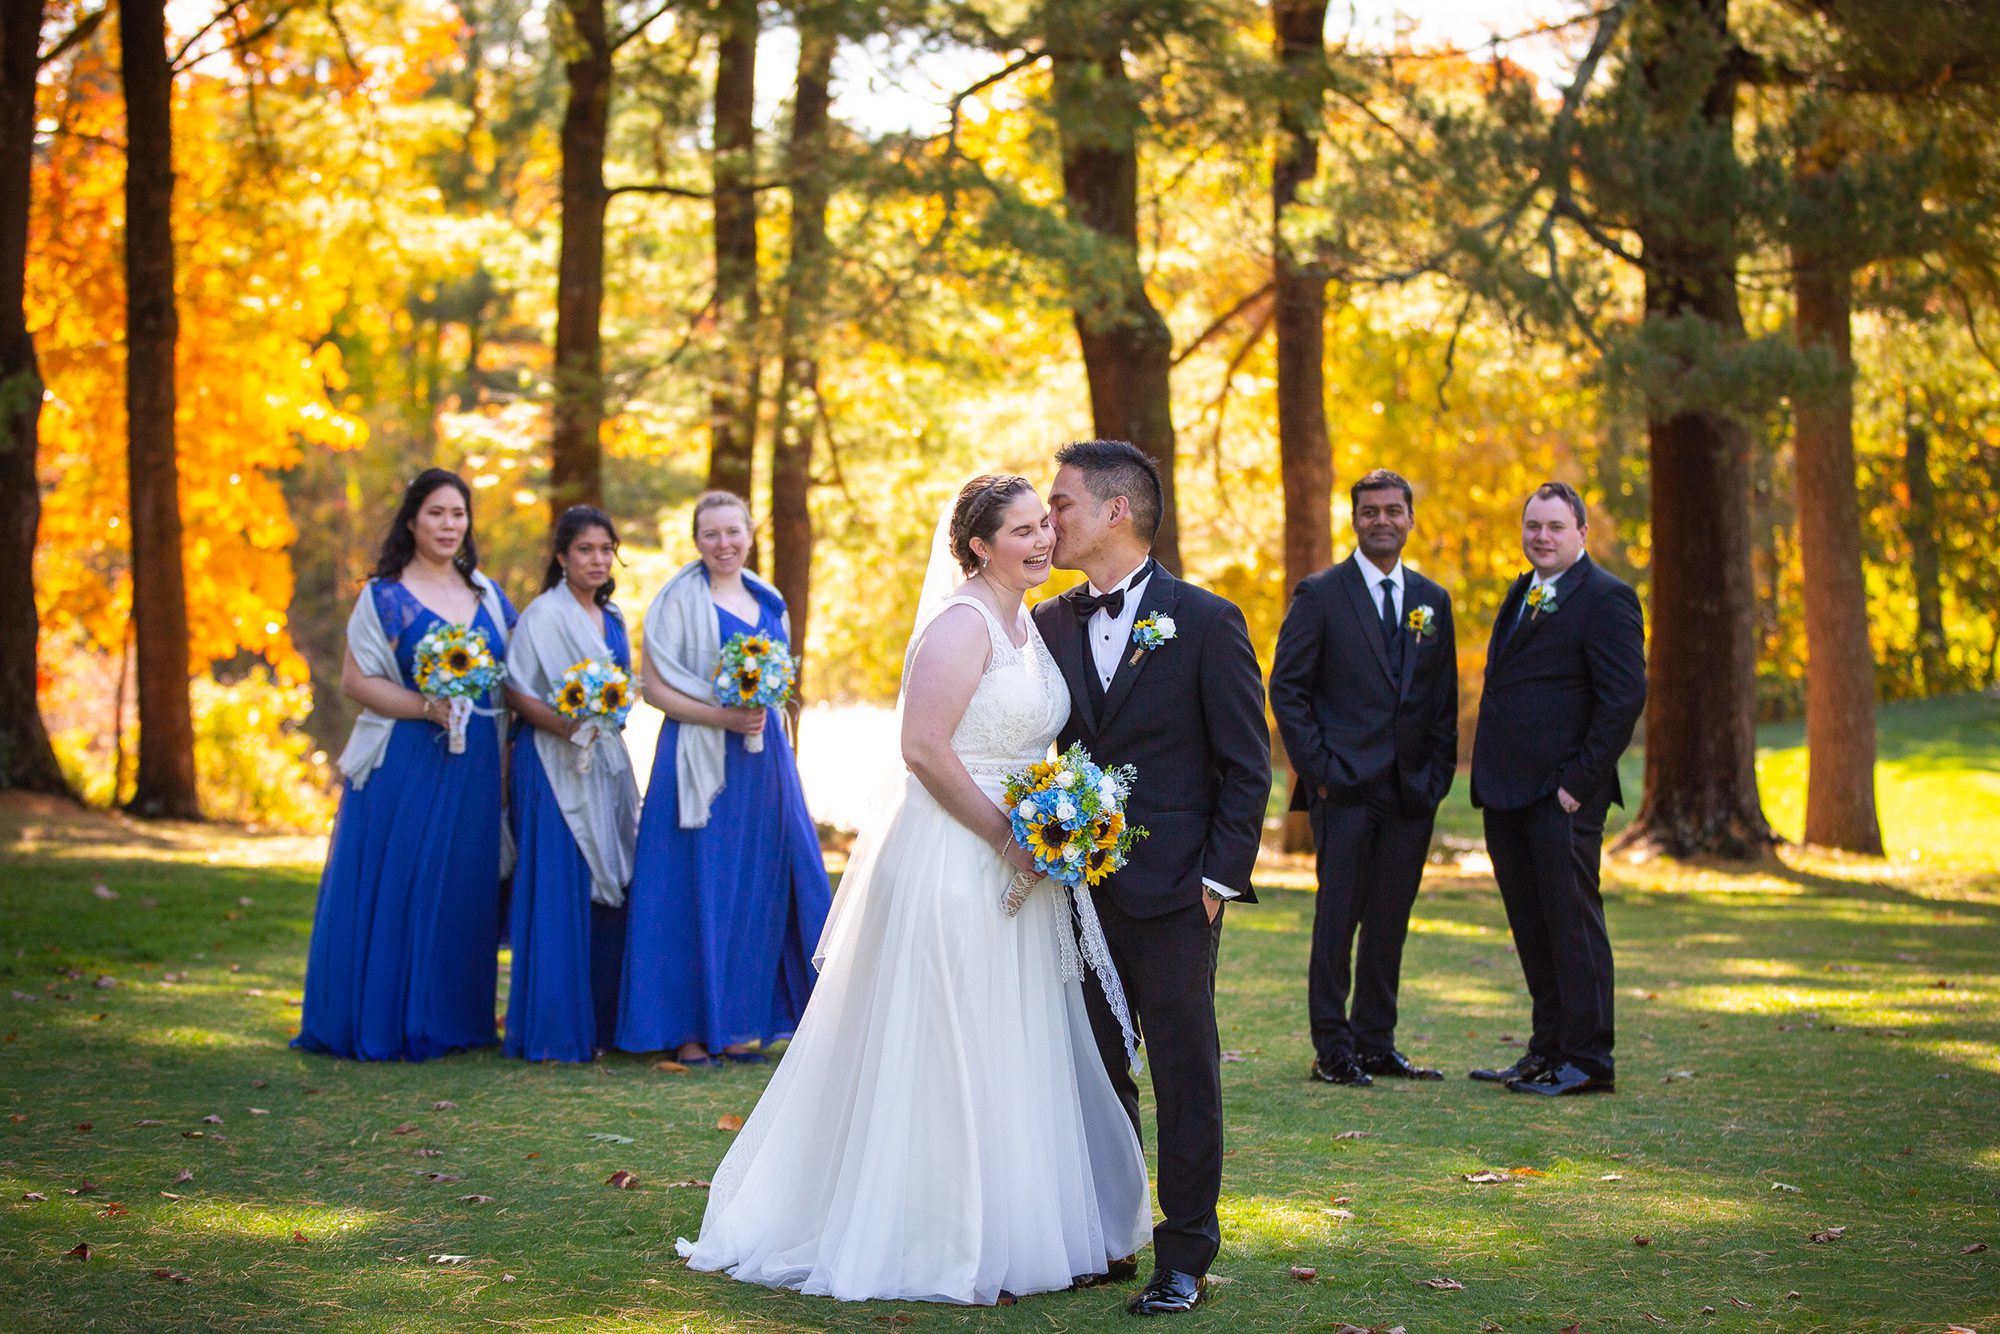 kissing-bride-groom-with-bridal-party-on-fairway-tatnuck-country-club-worcester-ma